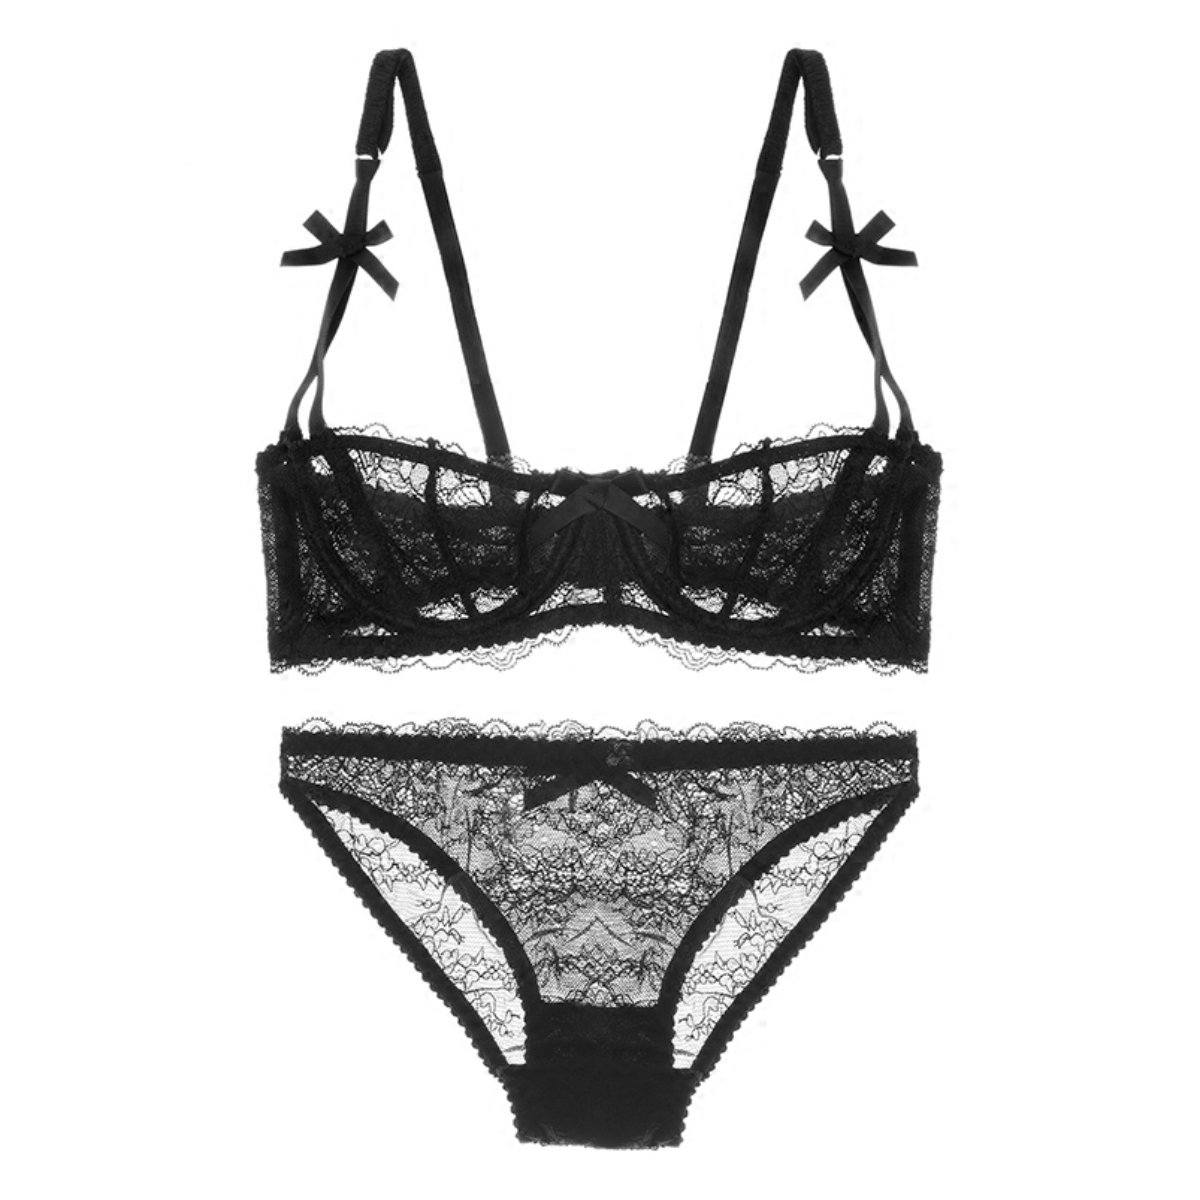 Yoomi lace lingerie set Intimates Lovefreya.co 70/32 A Black